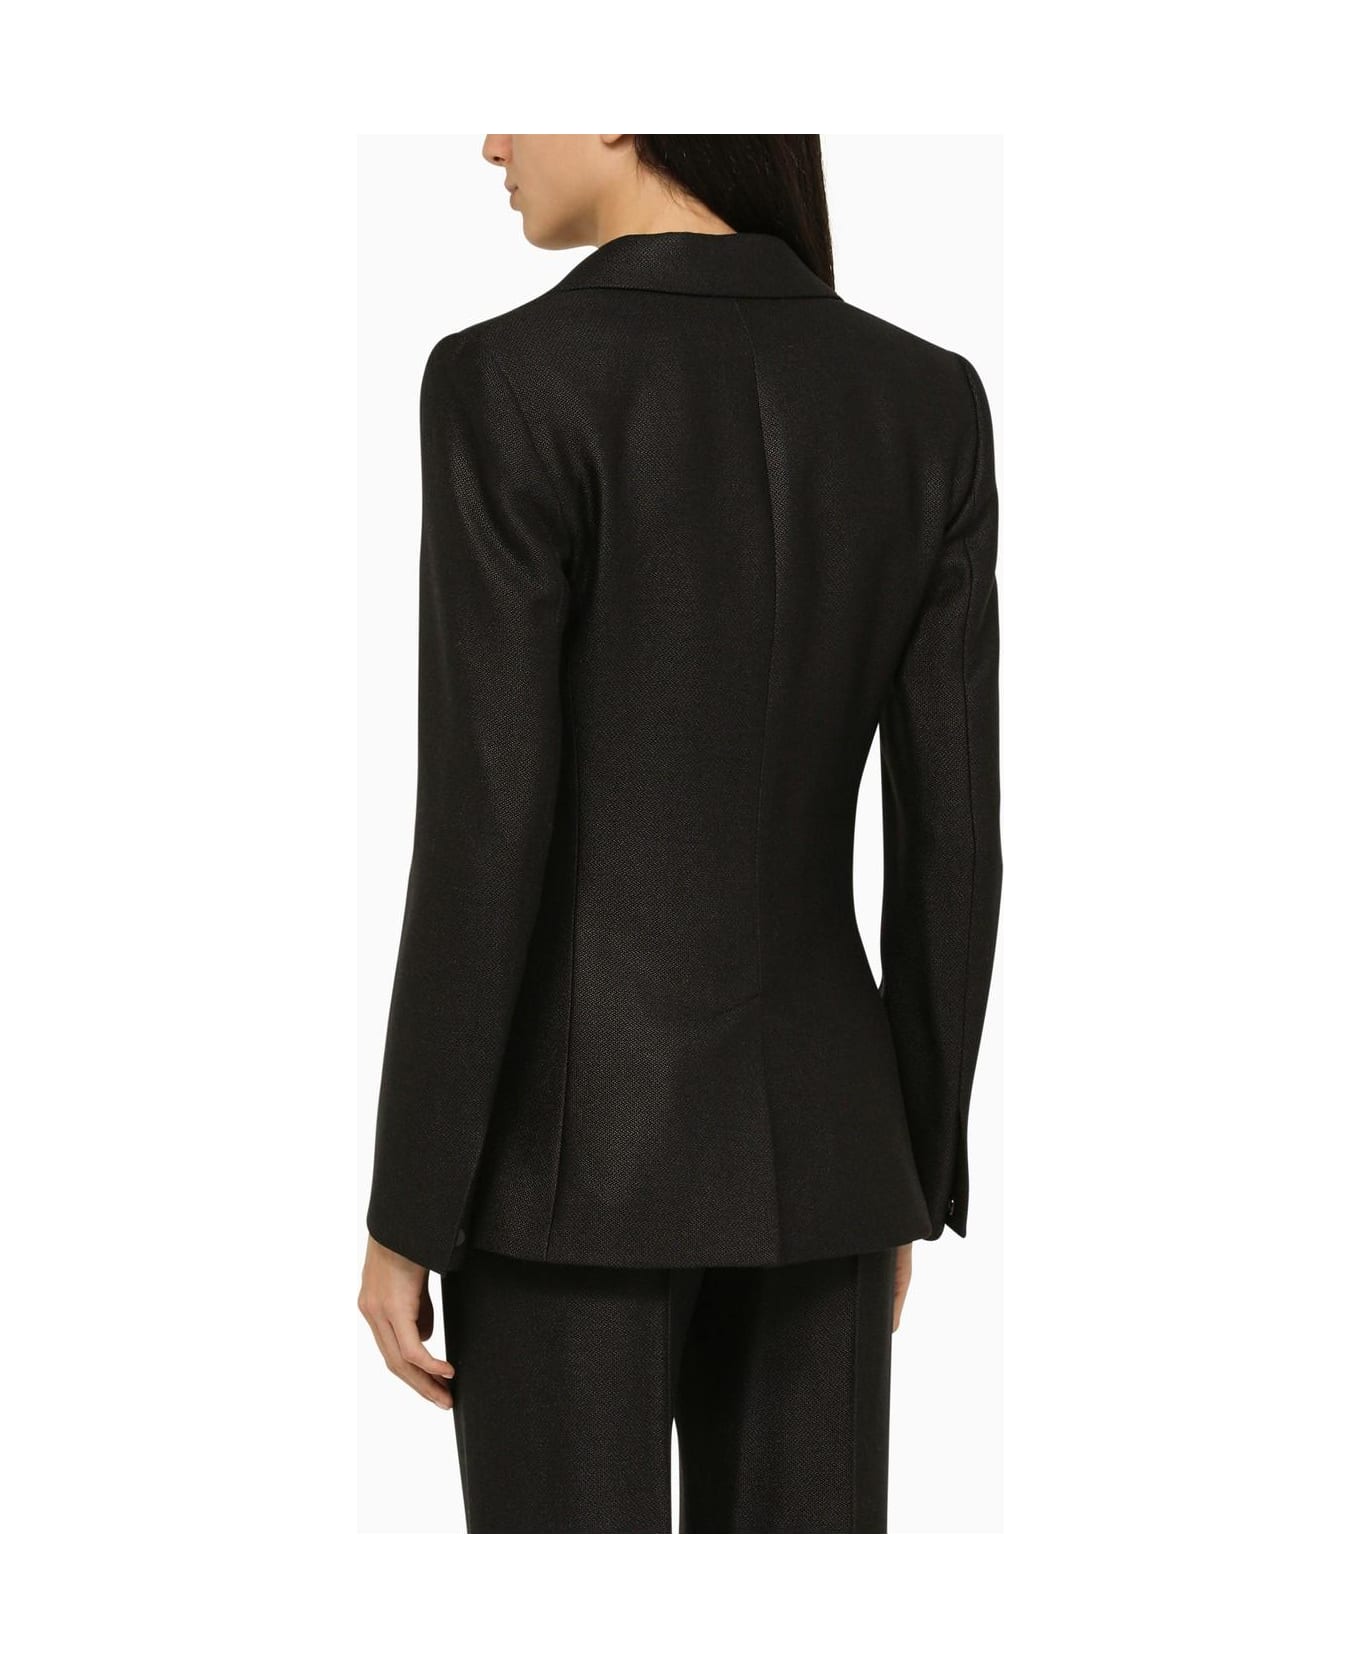 Chloé Single-breasted Tailored Jacket - BLACK ブレザー